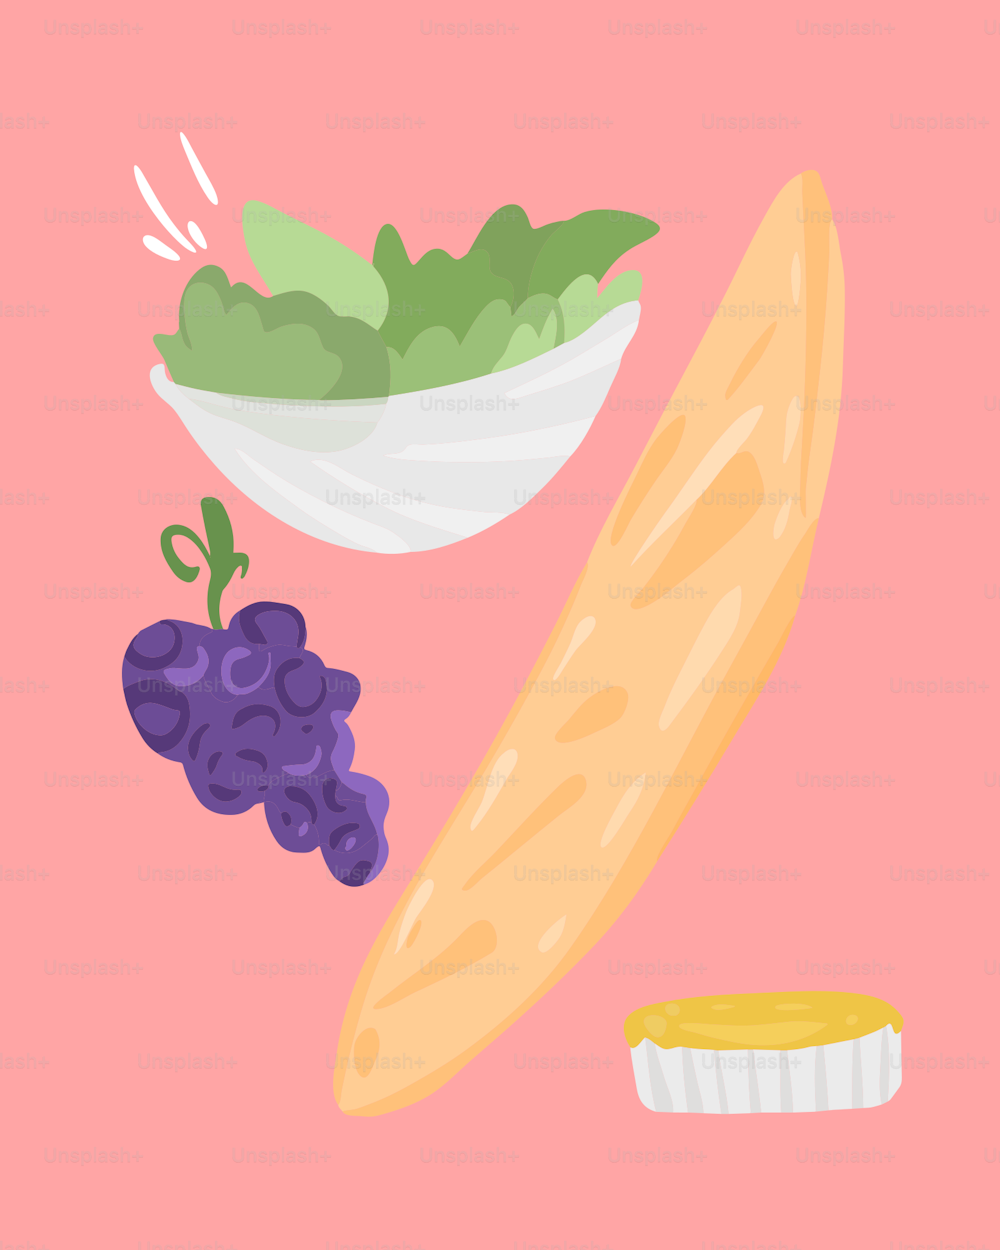 a bowl of grapes, a banana, and a piece of bread on a pink